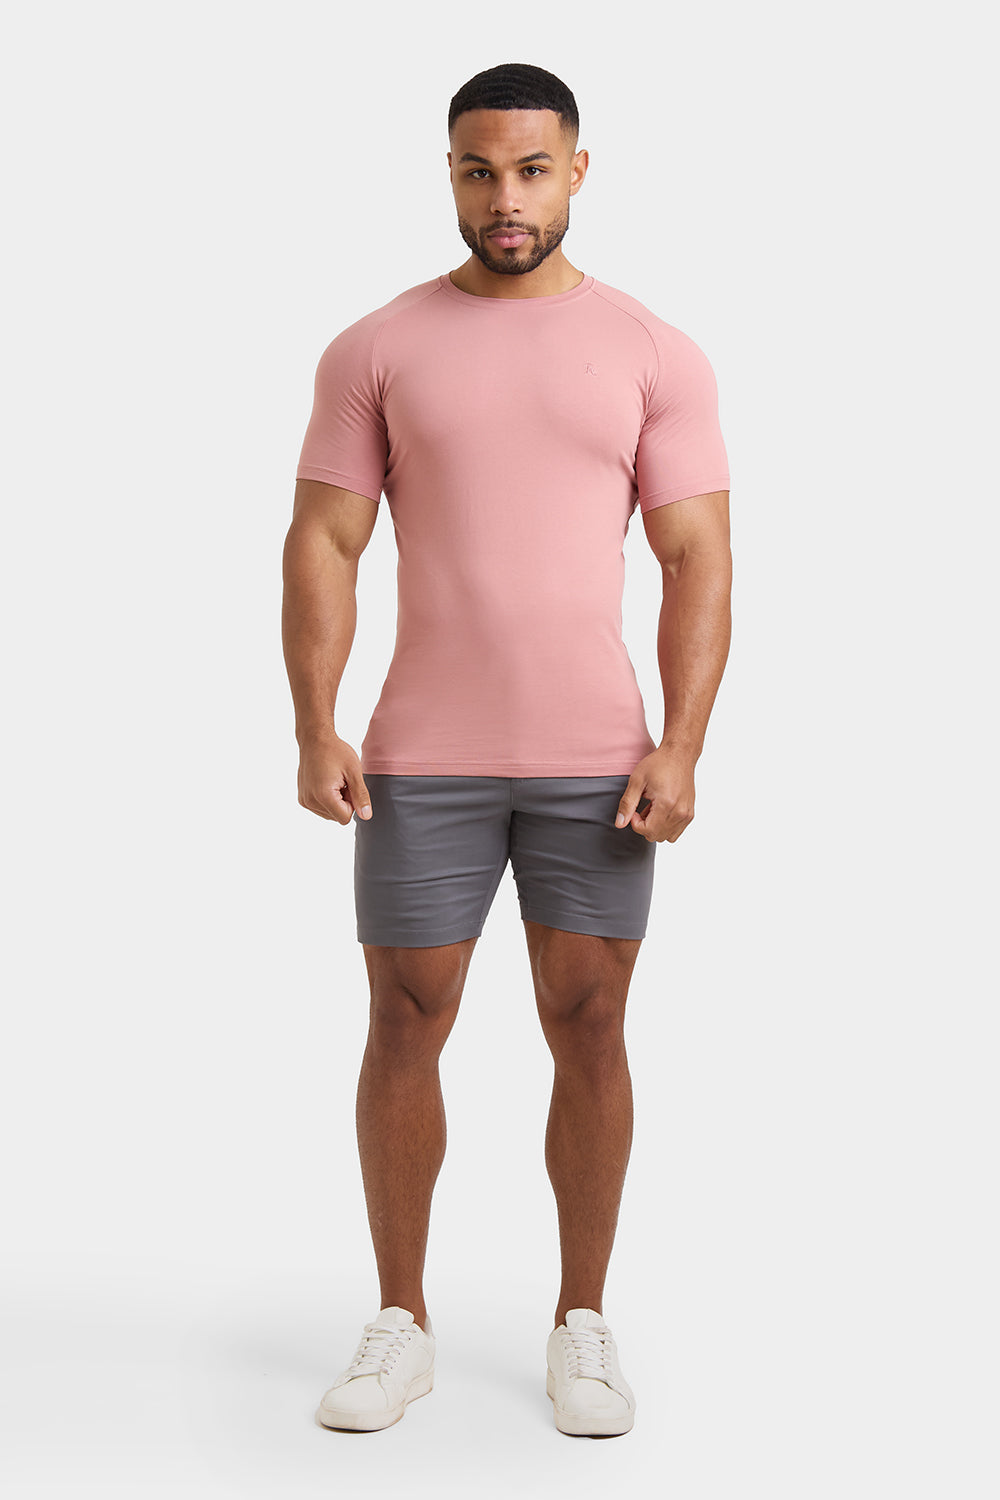 Muscle Fit T-Shirt in Bleached Terracotta - TAILORED ATHLETE - ROW